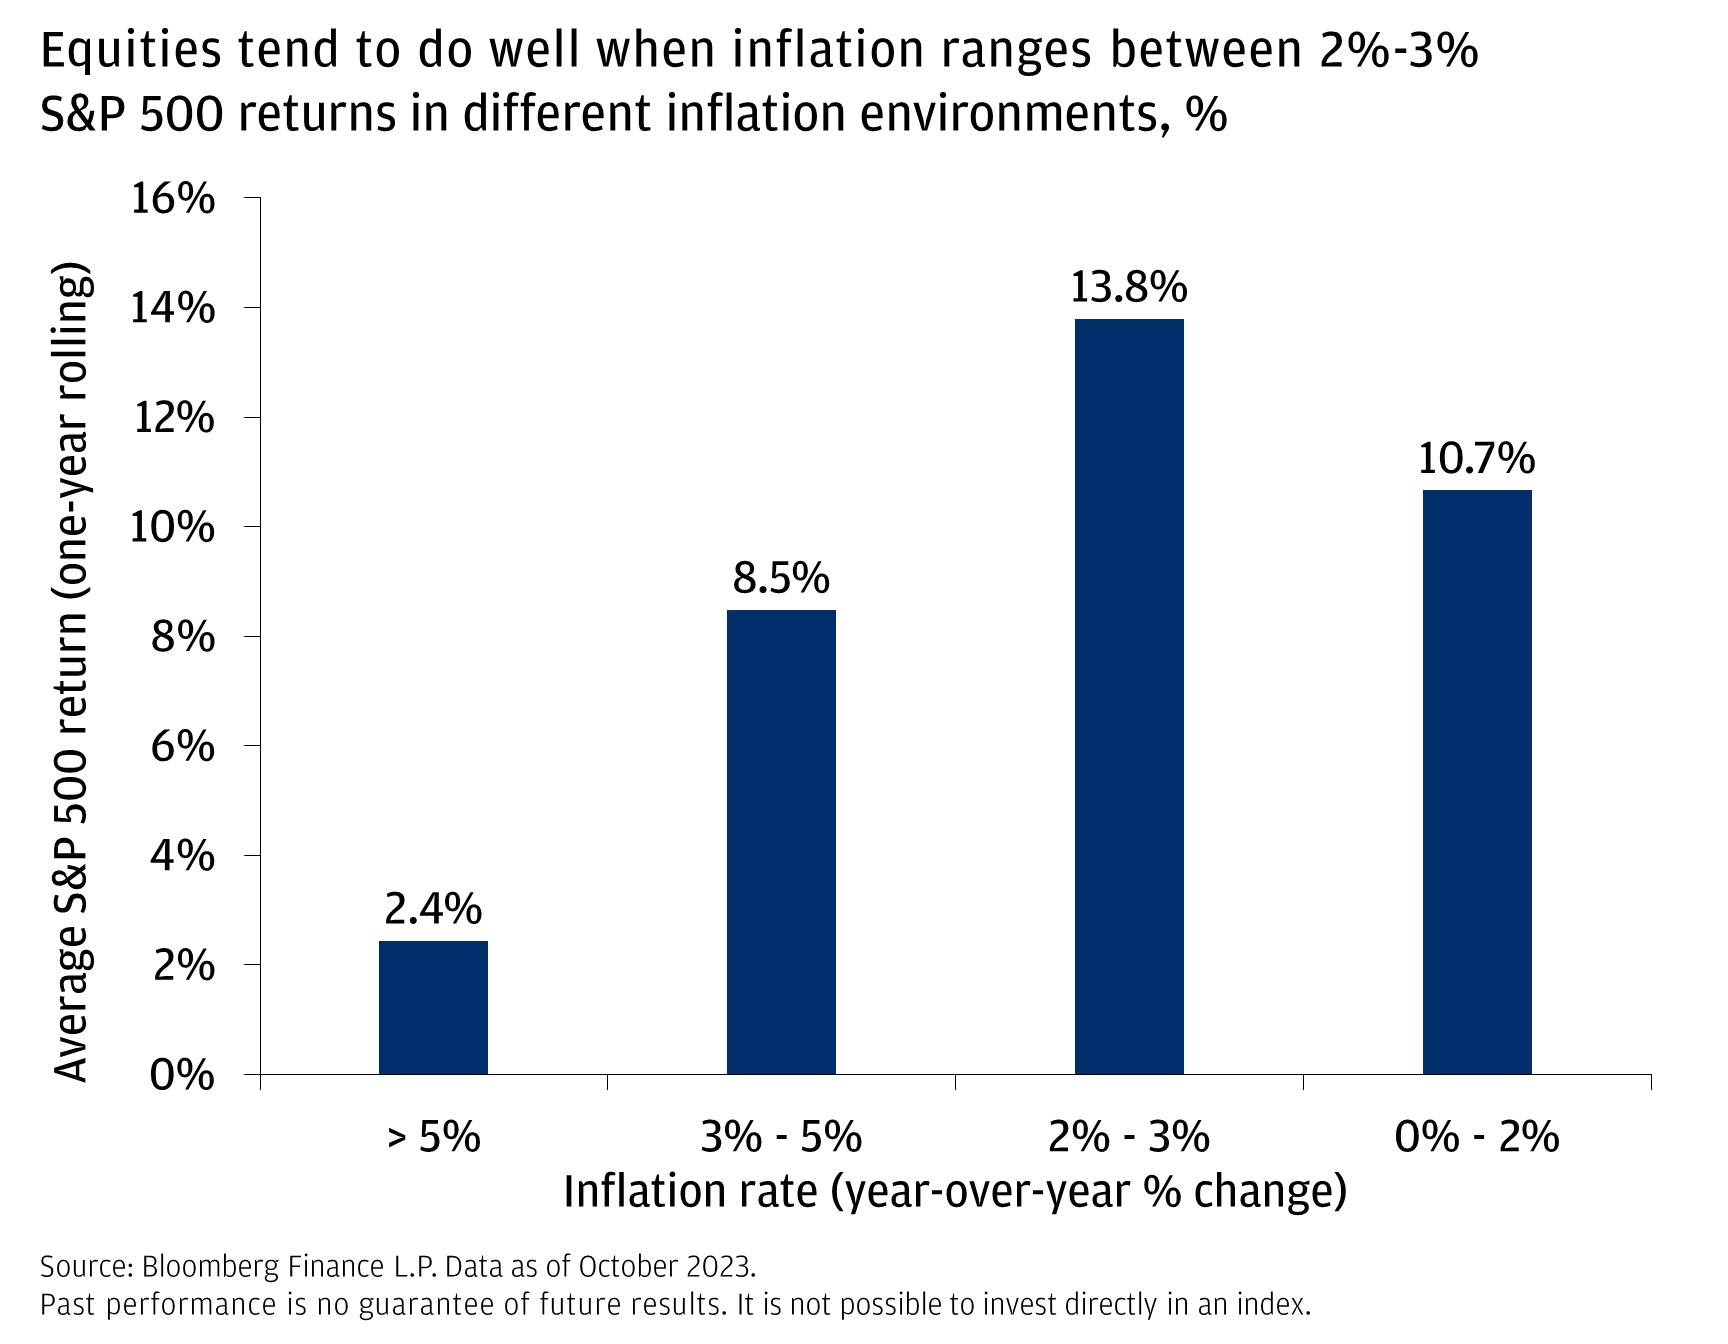 Equities tend to do well when inflation ranges between 2%-3%